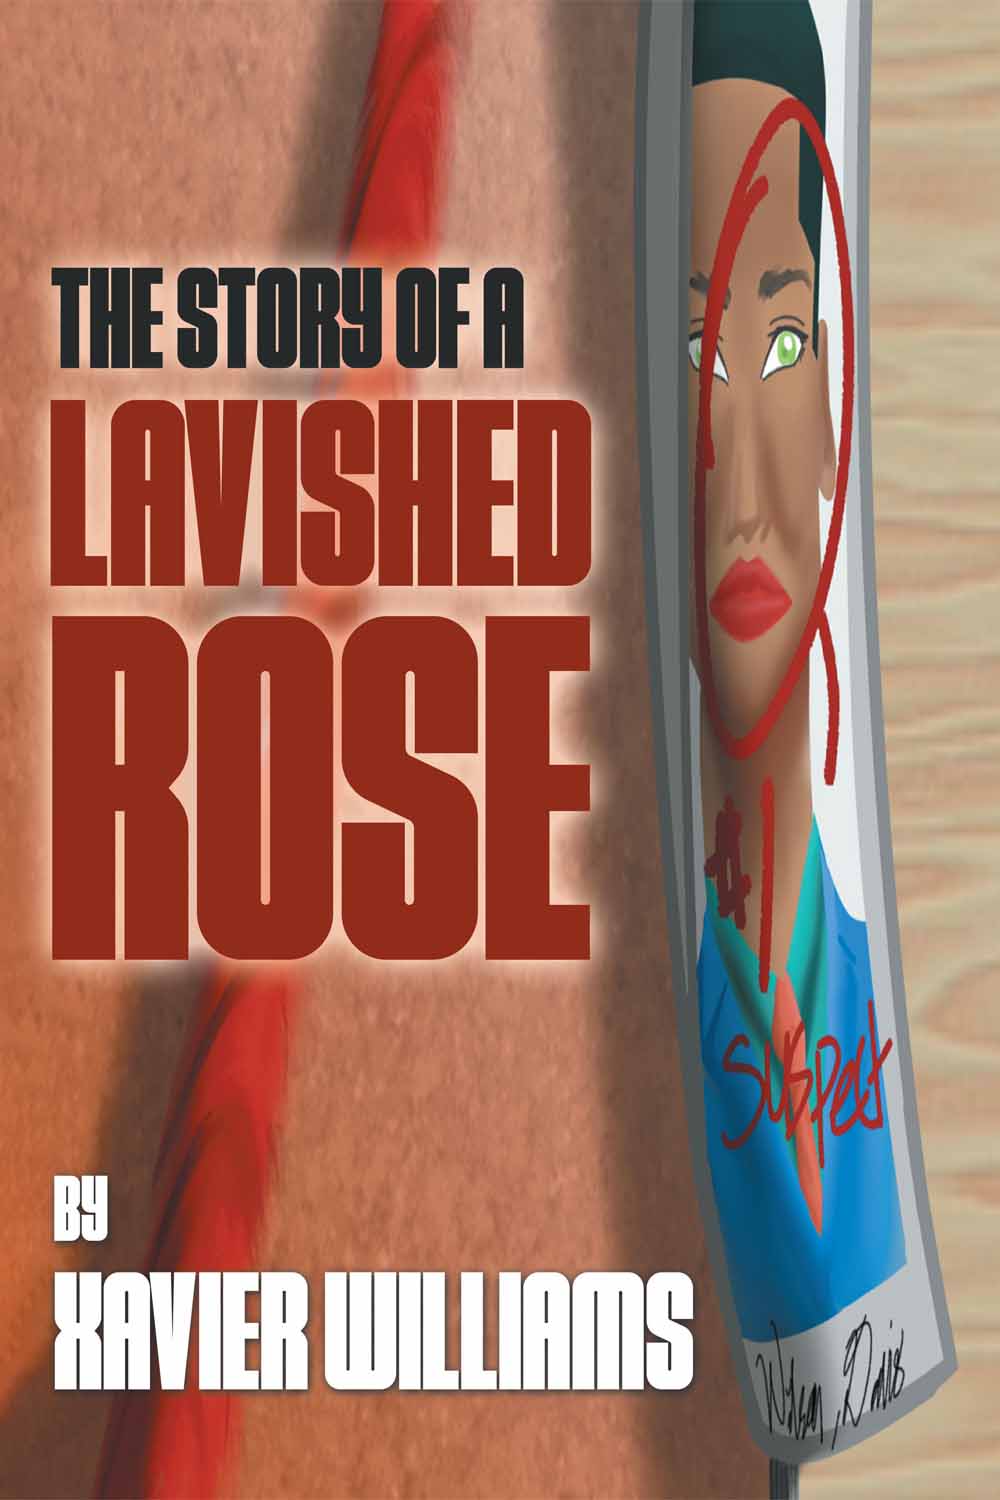 The Story of a Lavished Rose by Xavier Williams